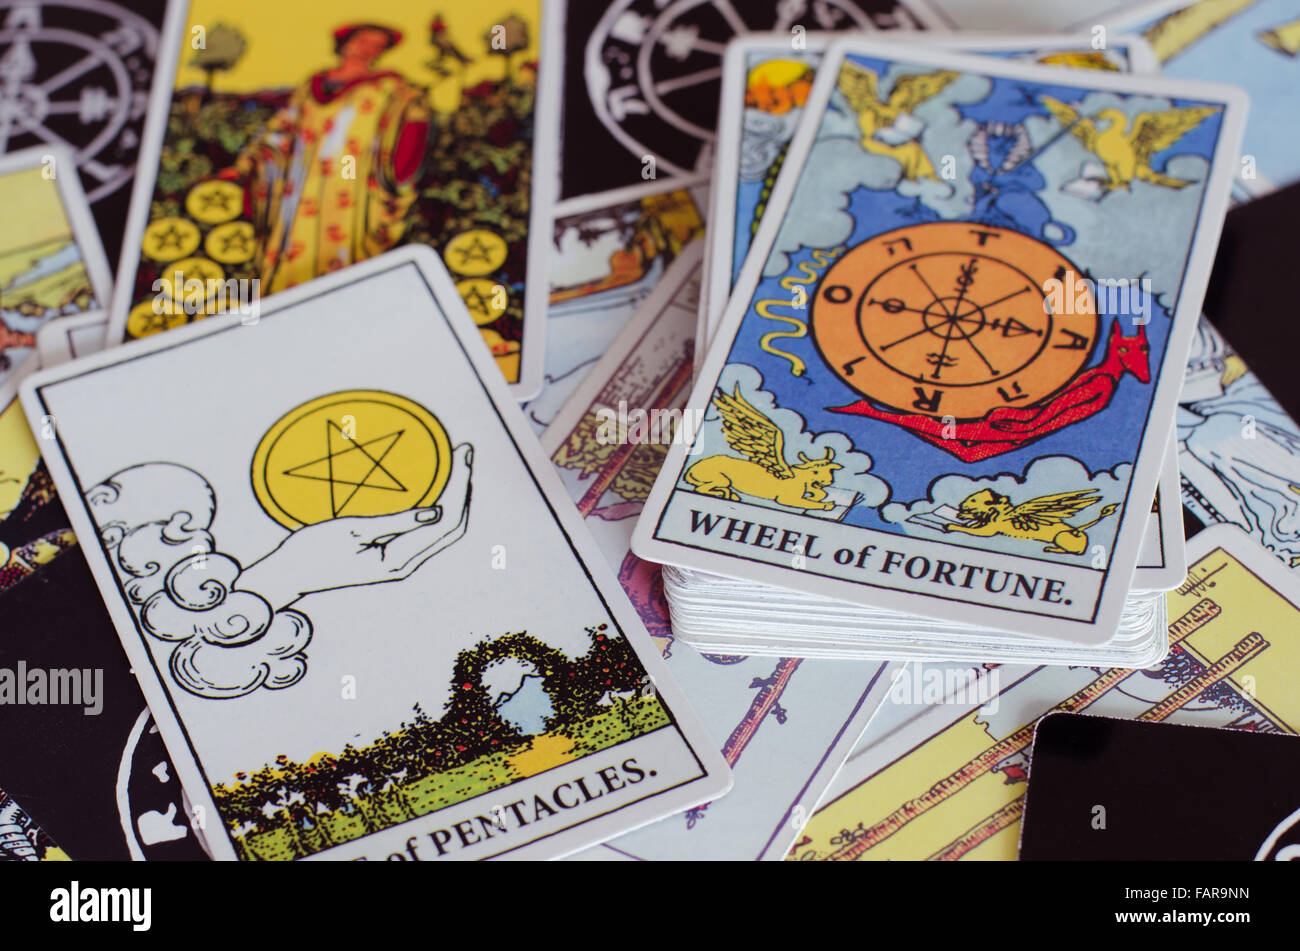 Tarot Cards - Ace of Pentacles and Wheel of Fortune Card. Stock Photo